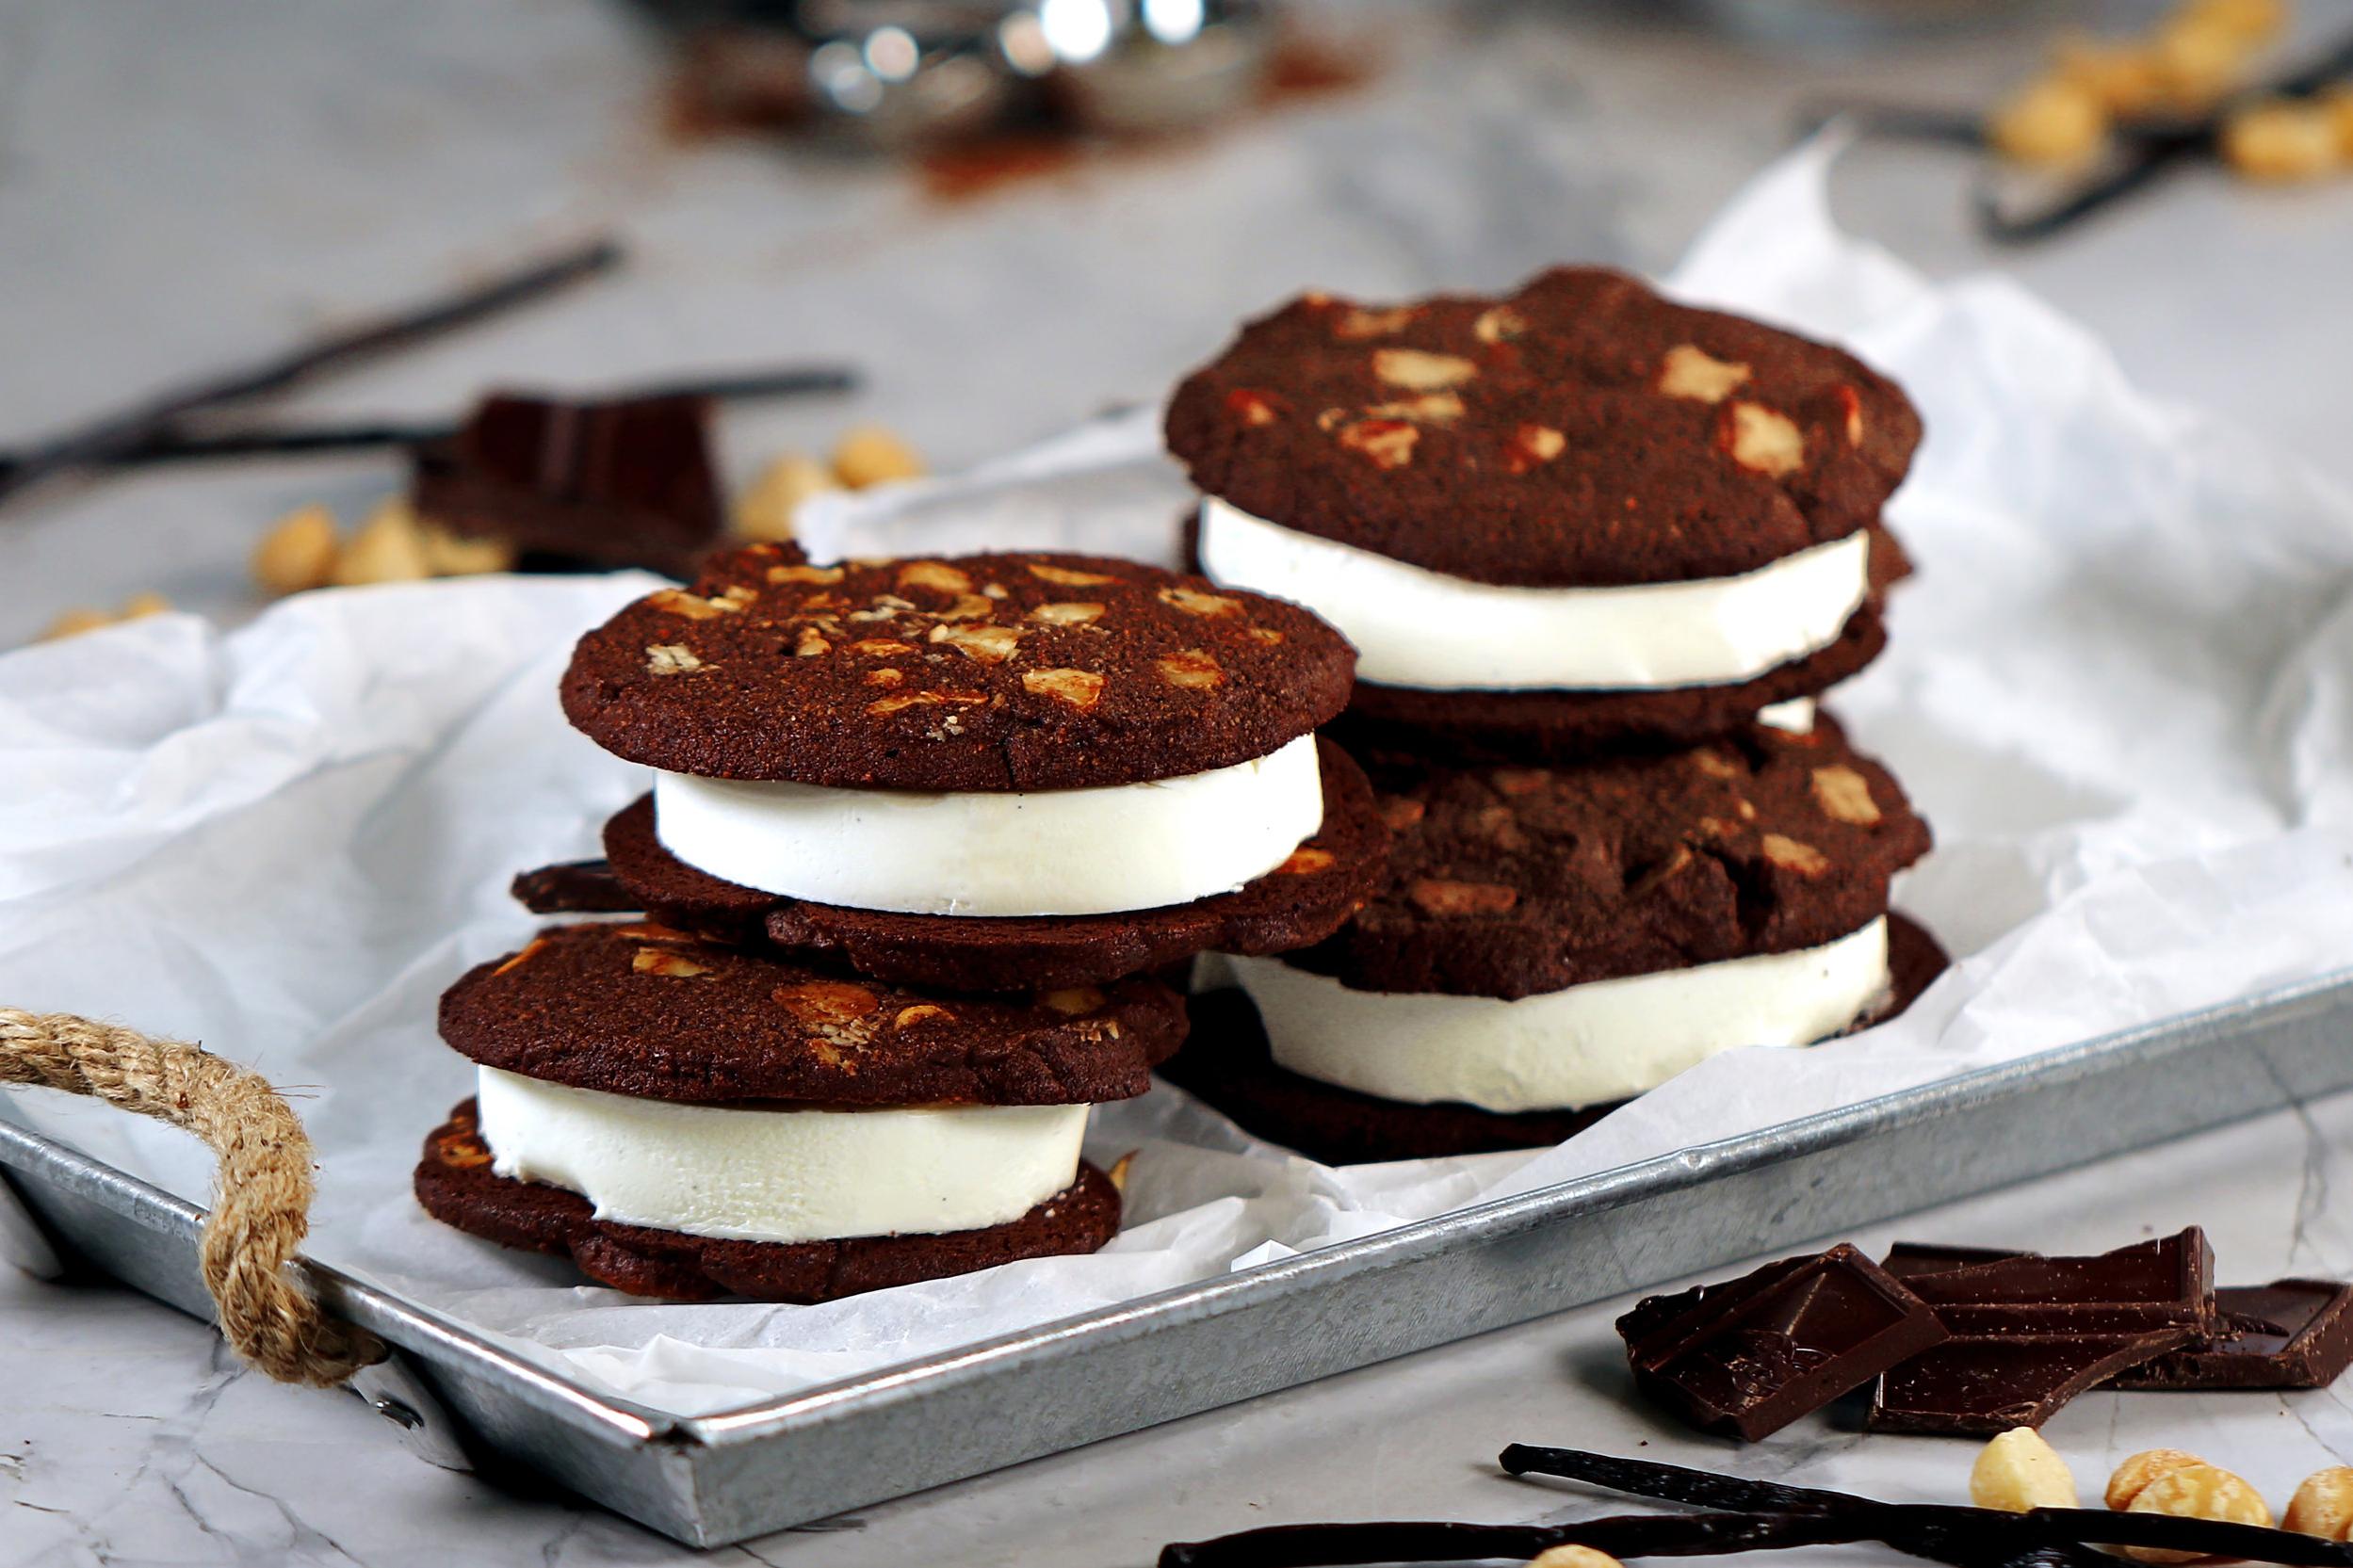  A decadent combination of cookies and ice cream for your taste buds to melt